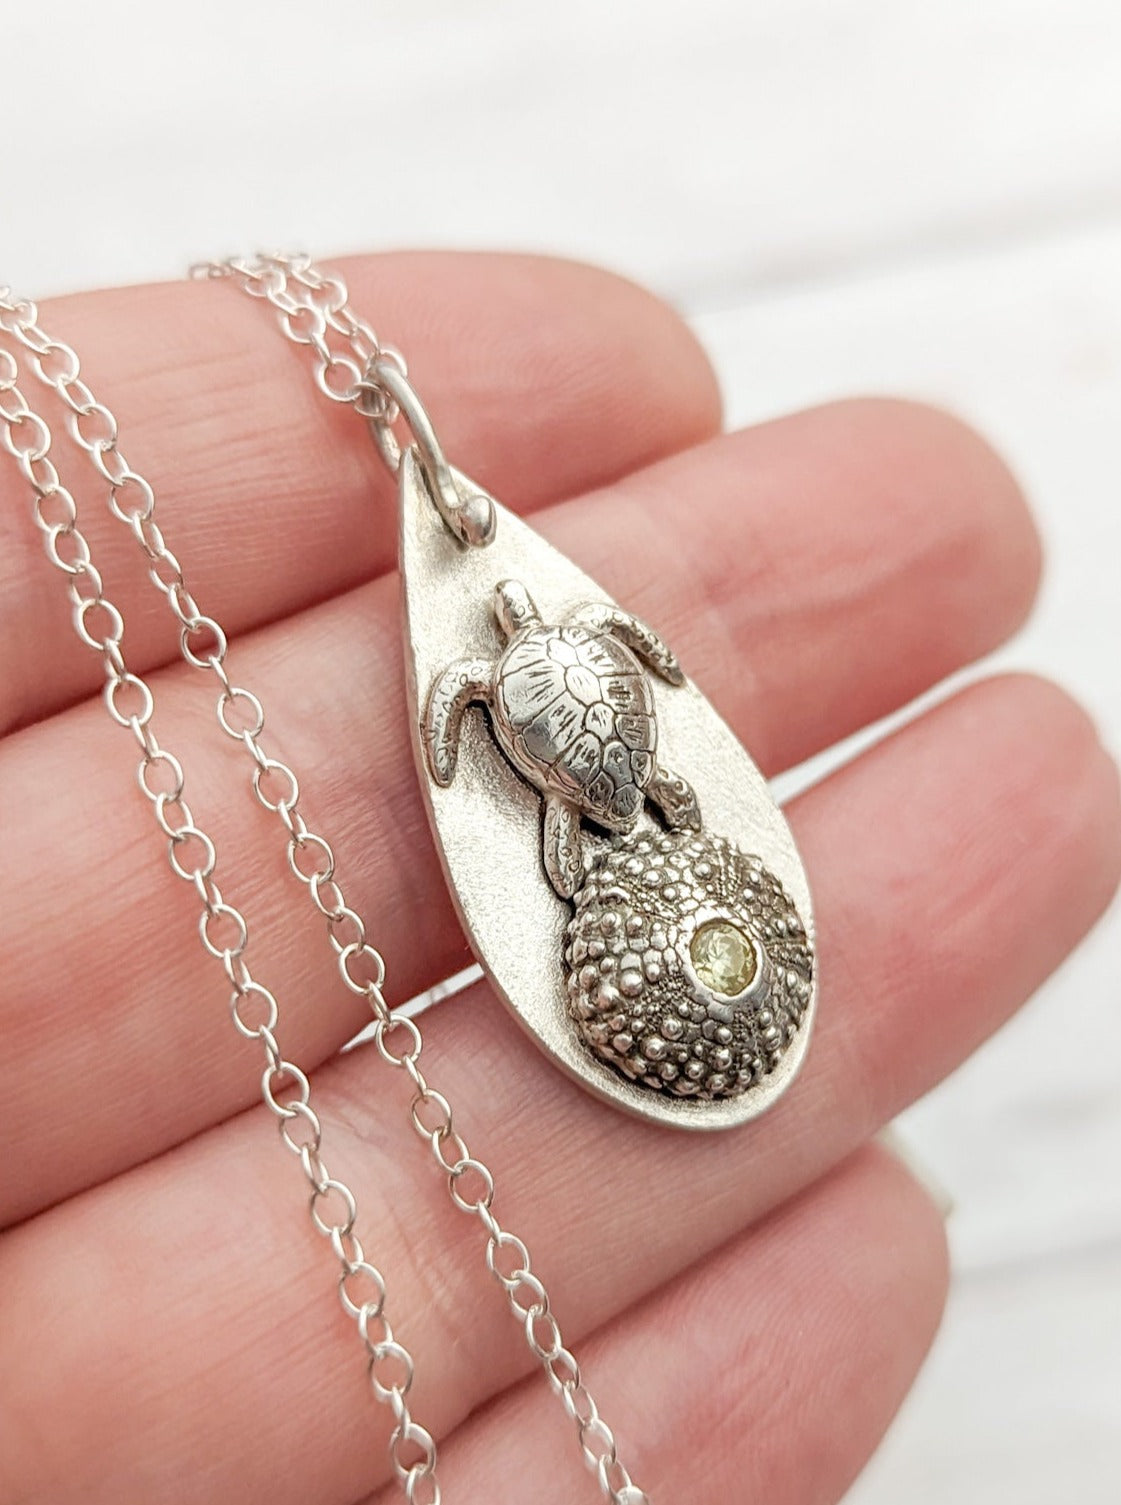 Stunning silver sea turtle necklace